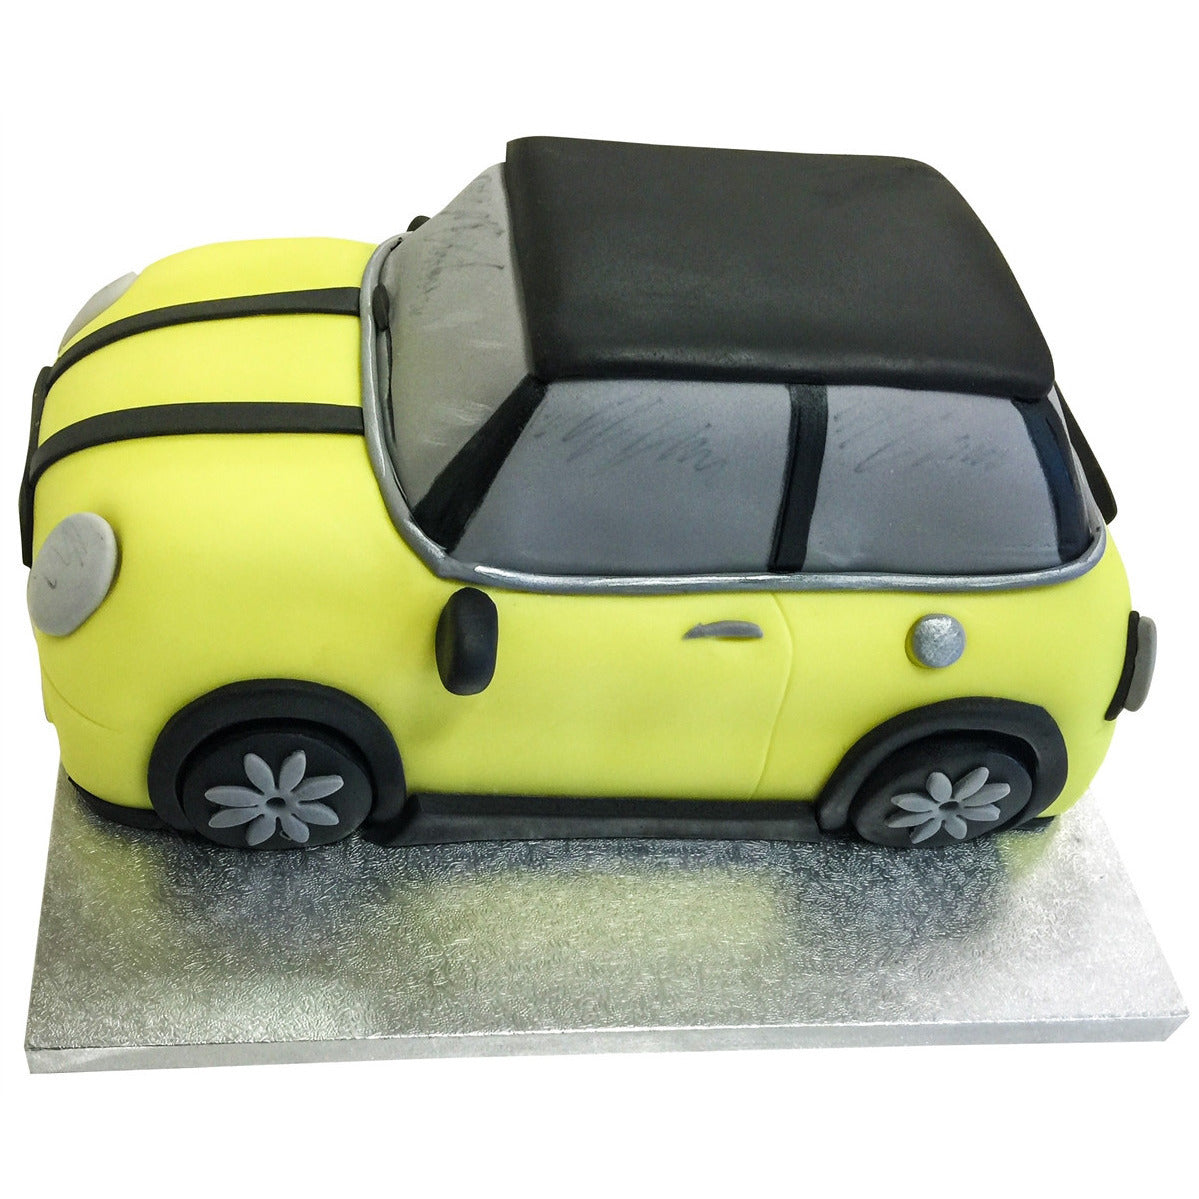 Car Cake - Buy Online, Free Next Day UK Delivery — New Cakes